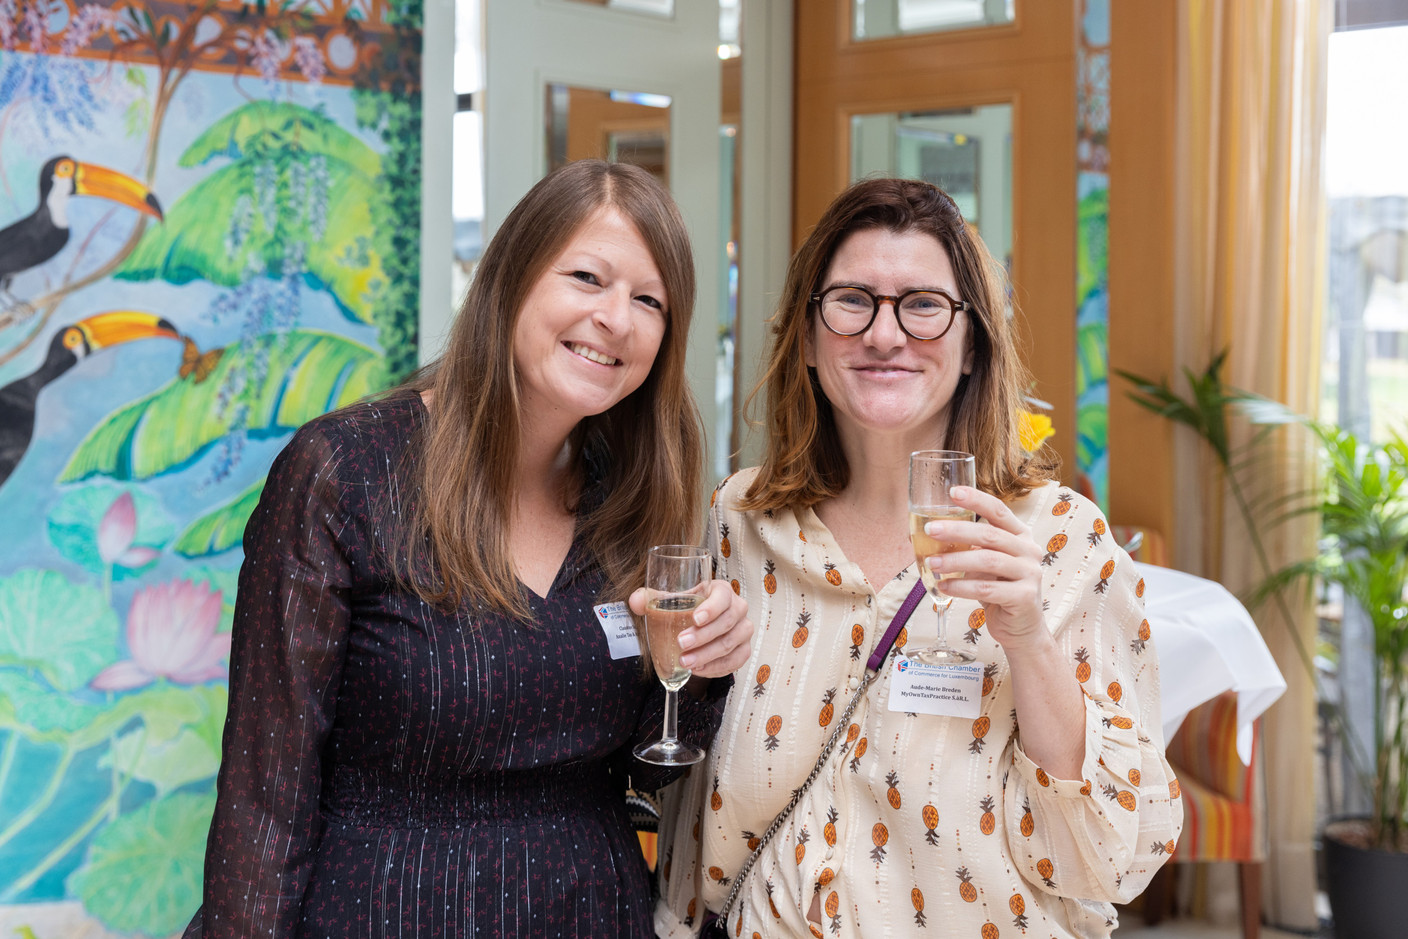  (l-r) Claudine Soisson, senior manager at Analie Tax, with Aude-Marie Breden, Myowntaxpractice, at the BCC & Amcham Personal Tax Lunch on 21 November 2023. Photo: Romain Gamba / Maison Moderne